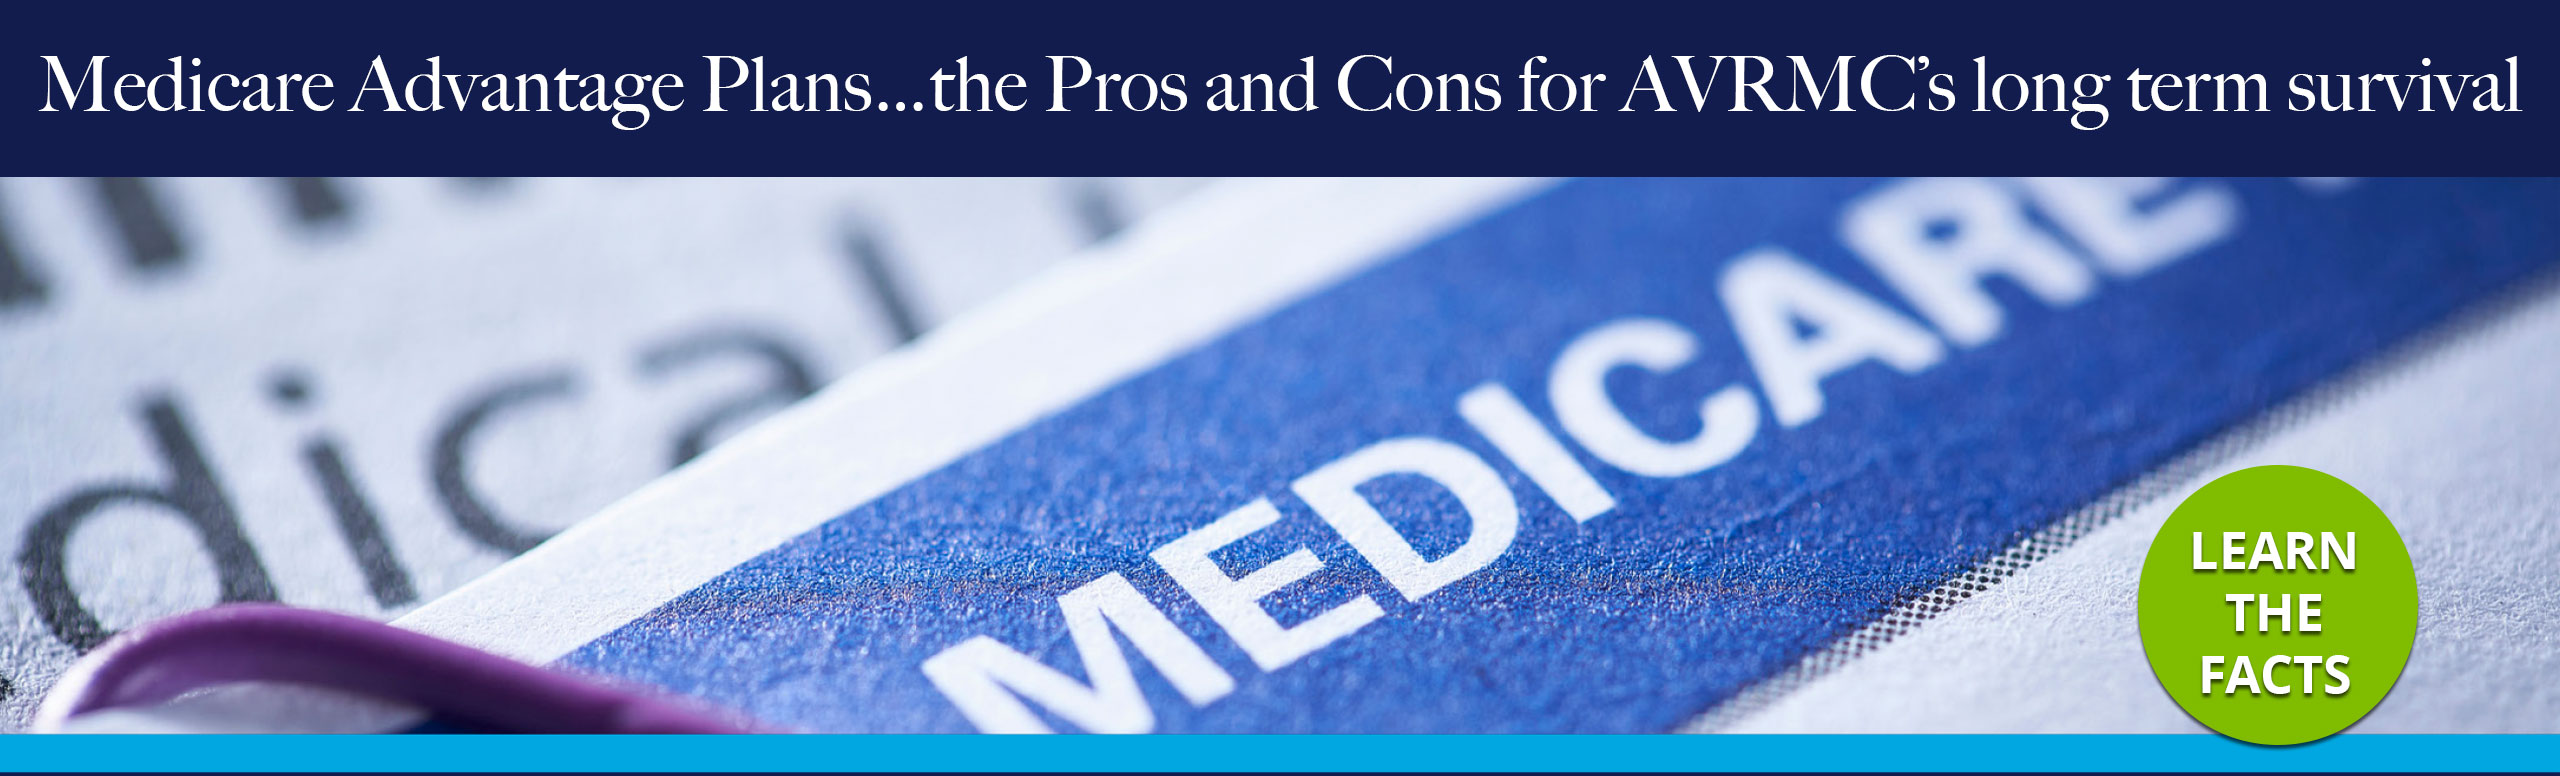 Medicare Advantage Plans…the Pros and Cons for
AVRMC’s long term survival